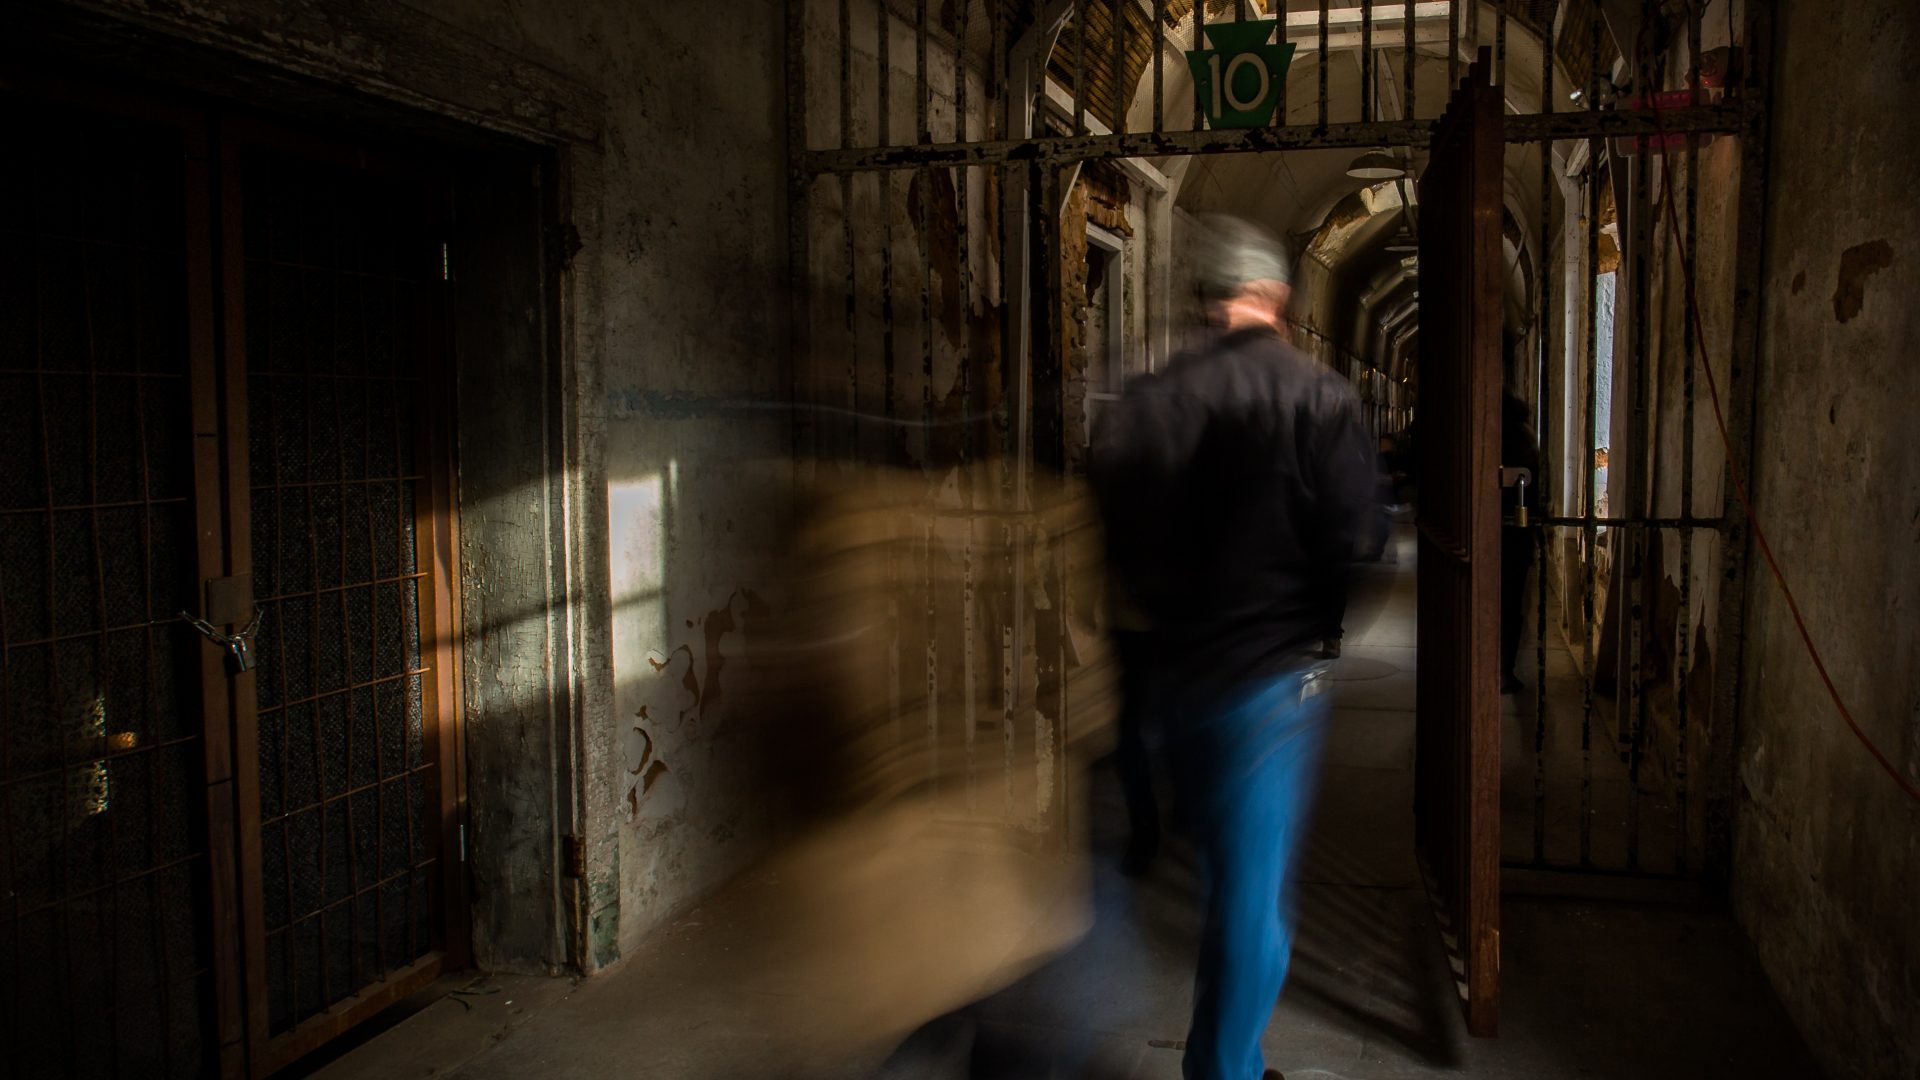 It's easy to understand why there are claims the Eastern State Penitentiary is haunted.